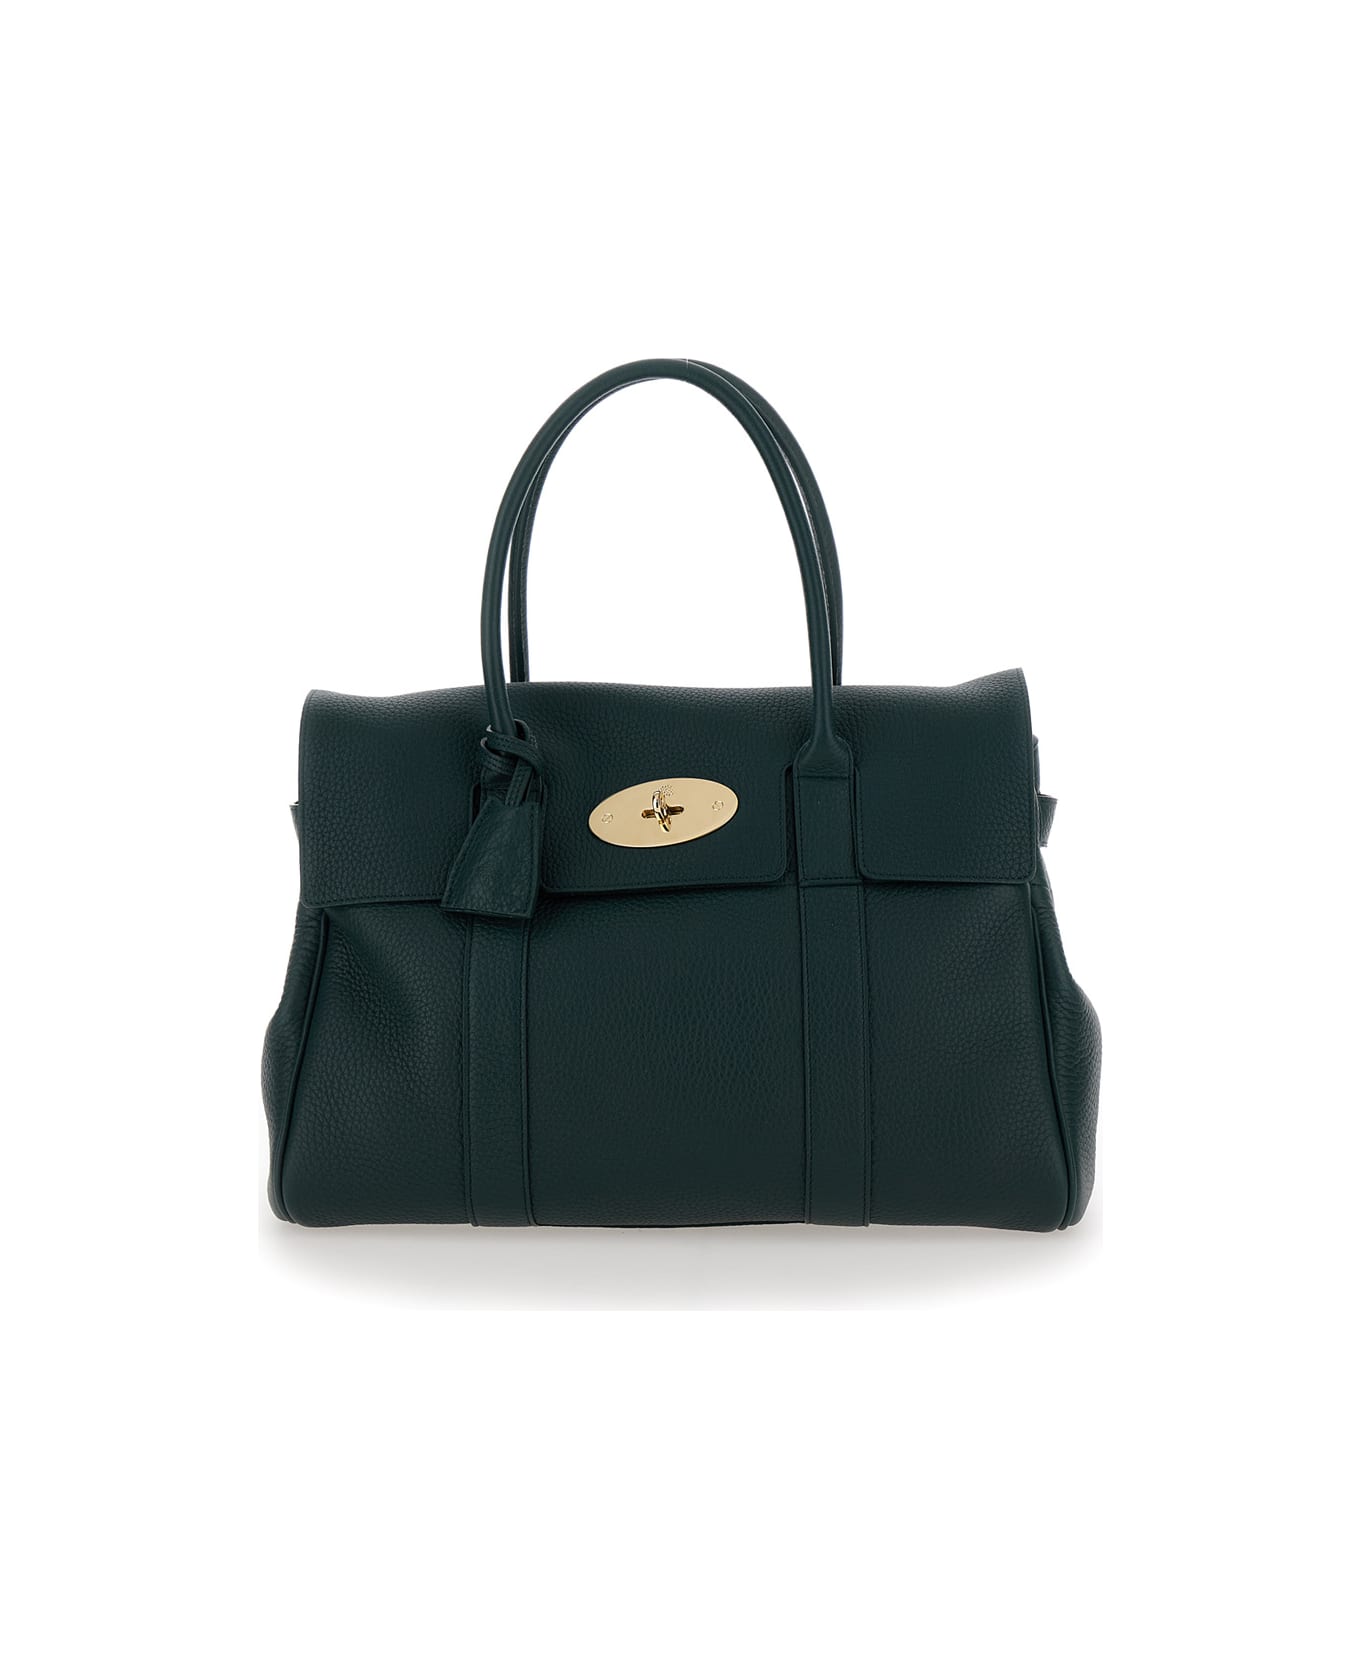 Mulberry 'bayswater' Green Handbag With Postman's Lock In Hammered Leather Woman - Green